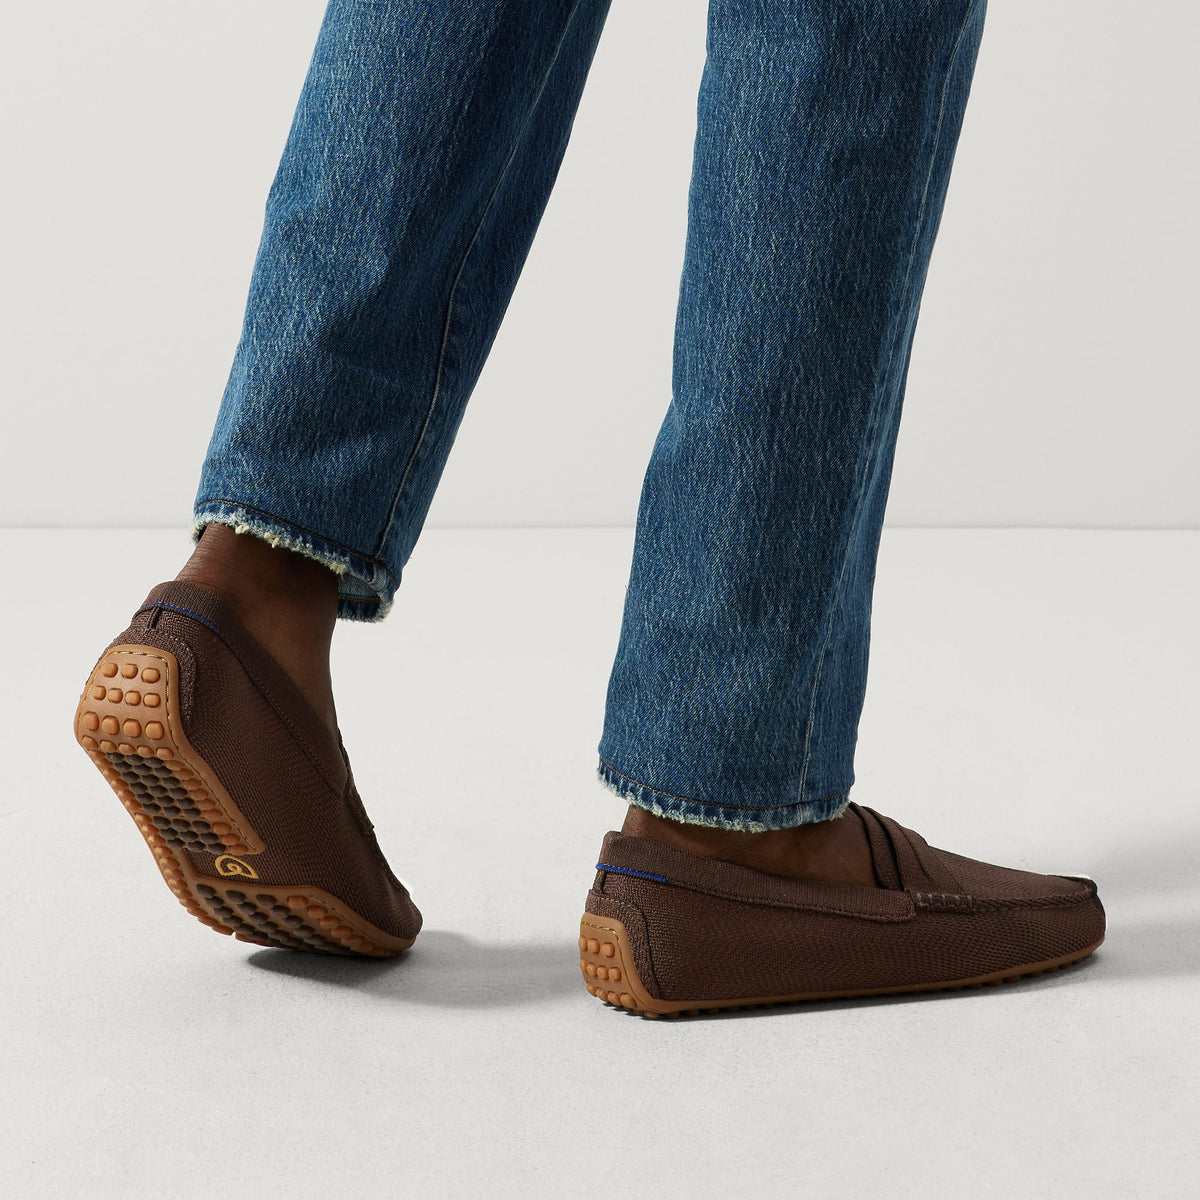 The Driving Loafer in Brown Herringbone | Men’s Slip-on Loafers | Rothy's